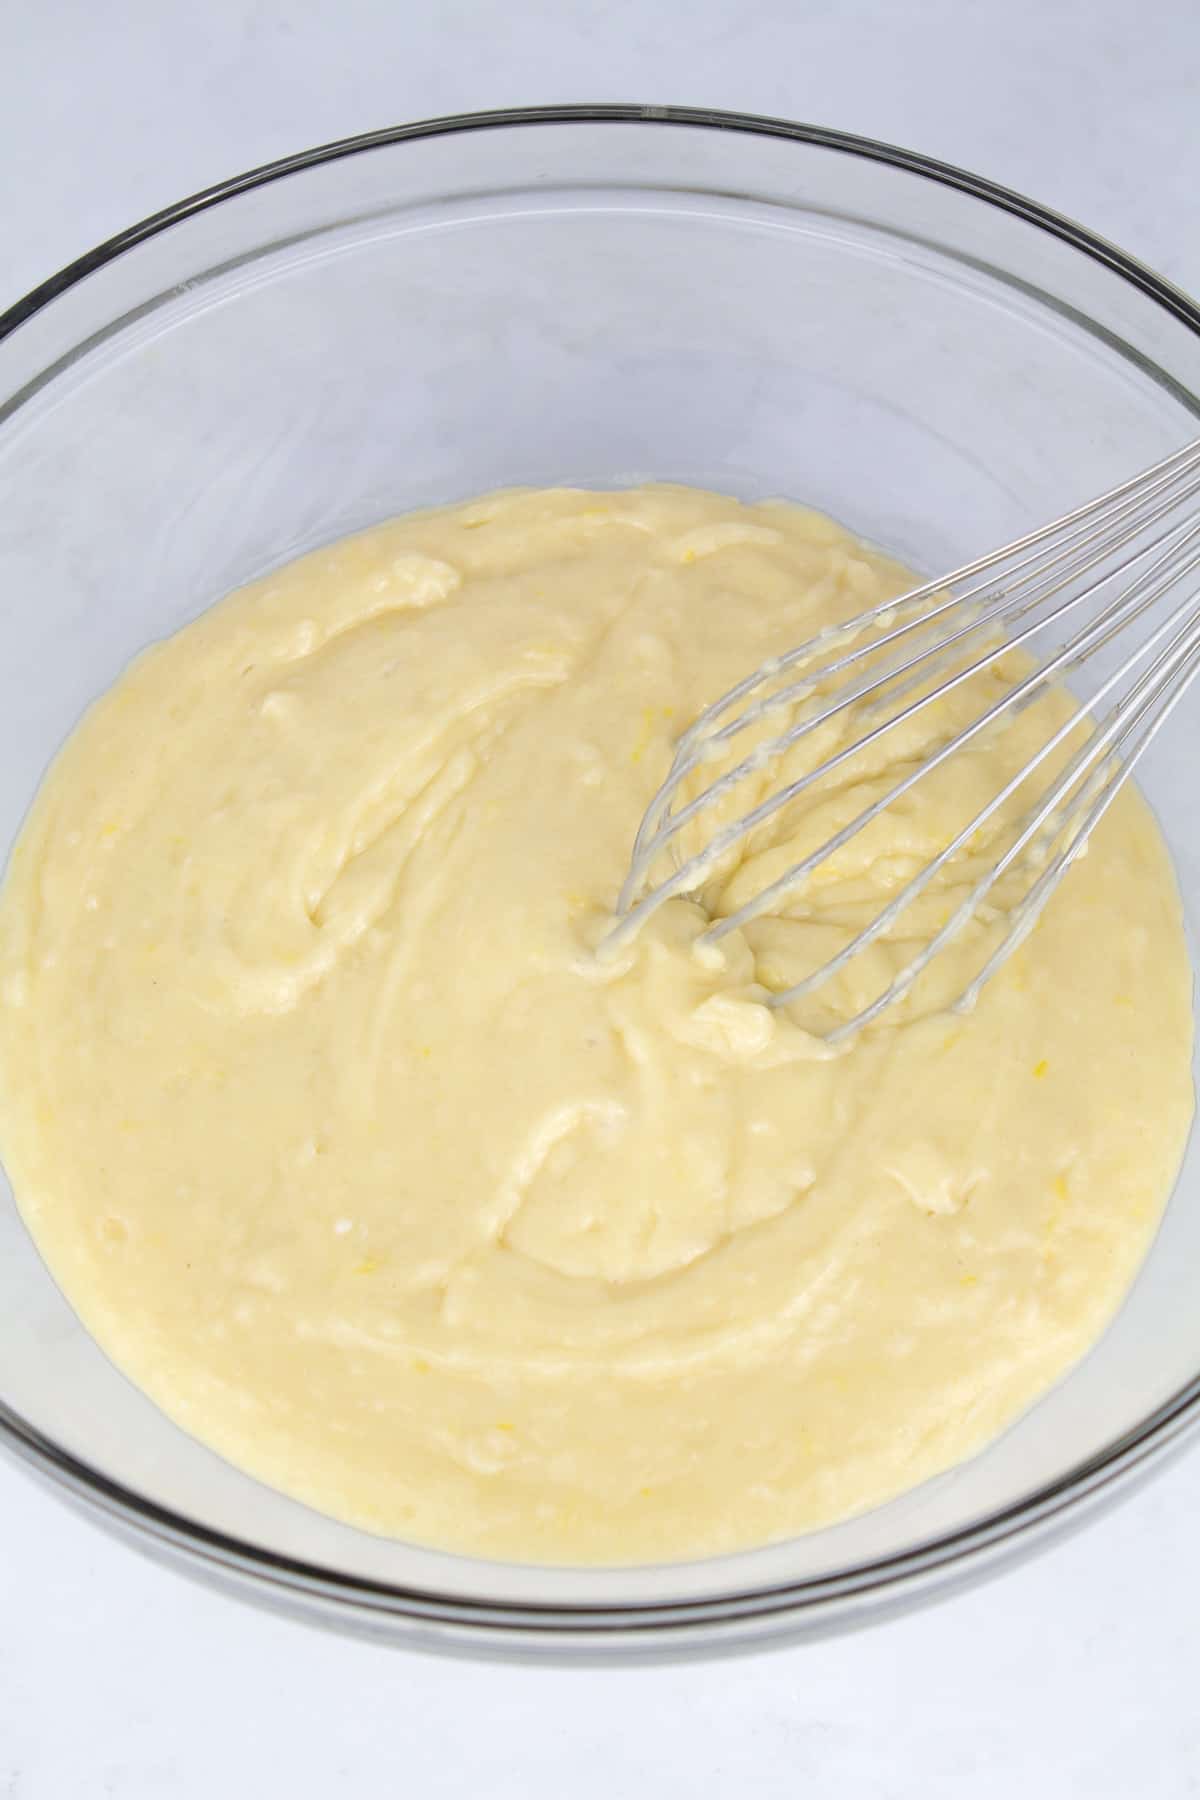 Finished cake batter in a clear glass bowl with a whisk sitting in the back of the bowl.